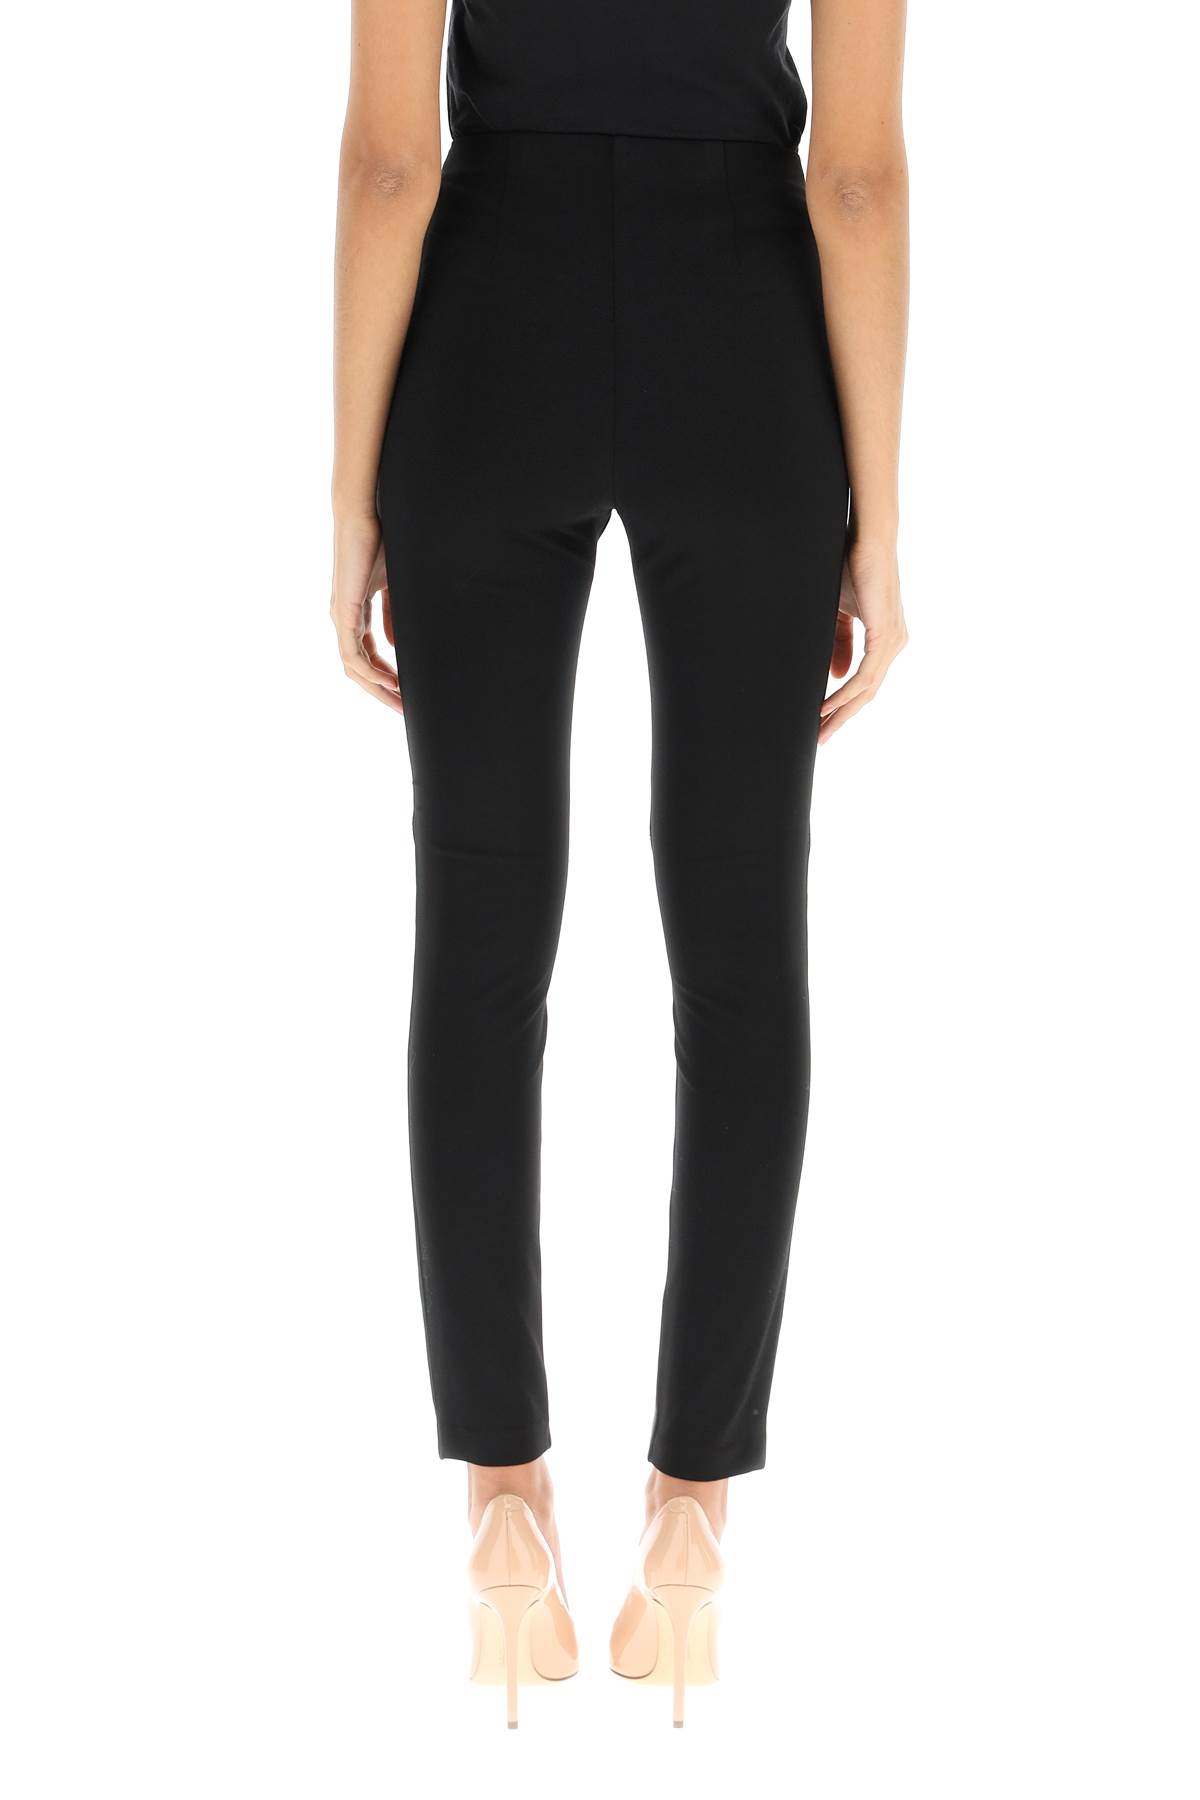 Shop Guess By Marciano Leather And Jersey Leggings In Jet Black A996 (black)